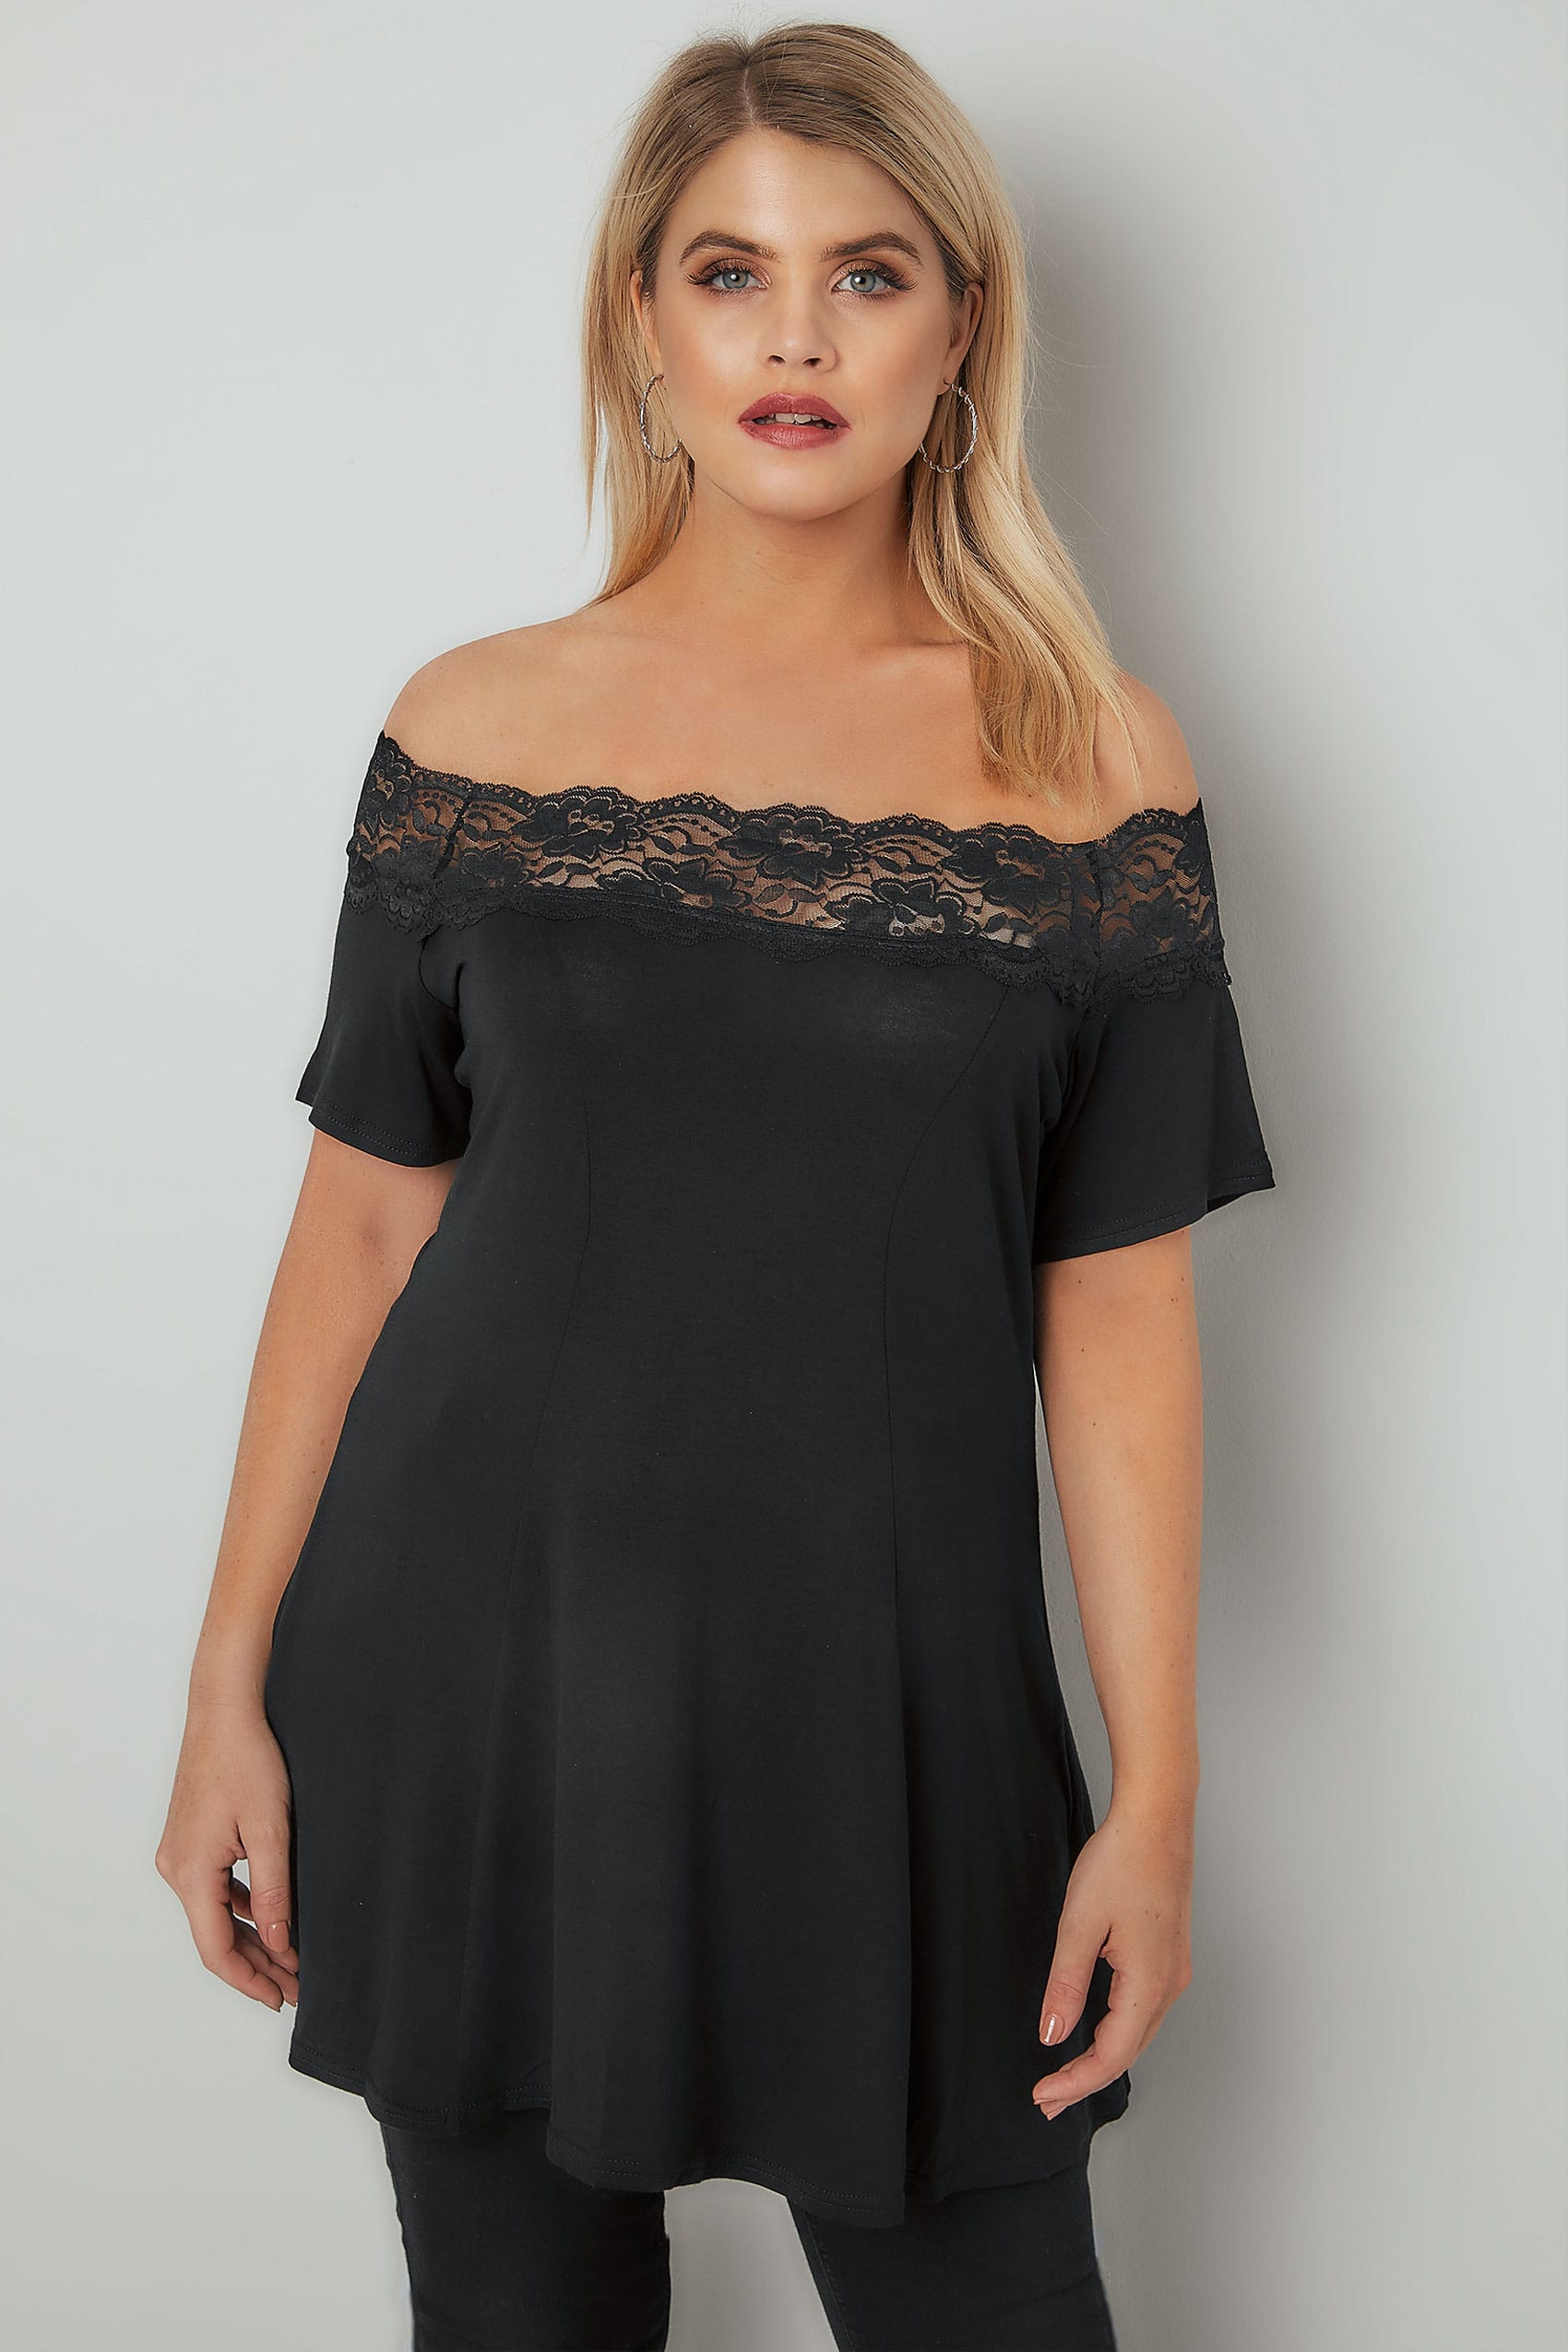 Black Lace Bardot Top With Short Sleeves, Plus Size 16 to 36